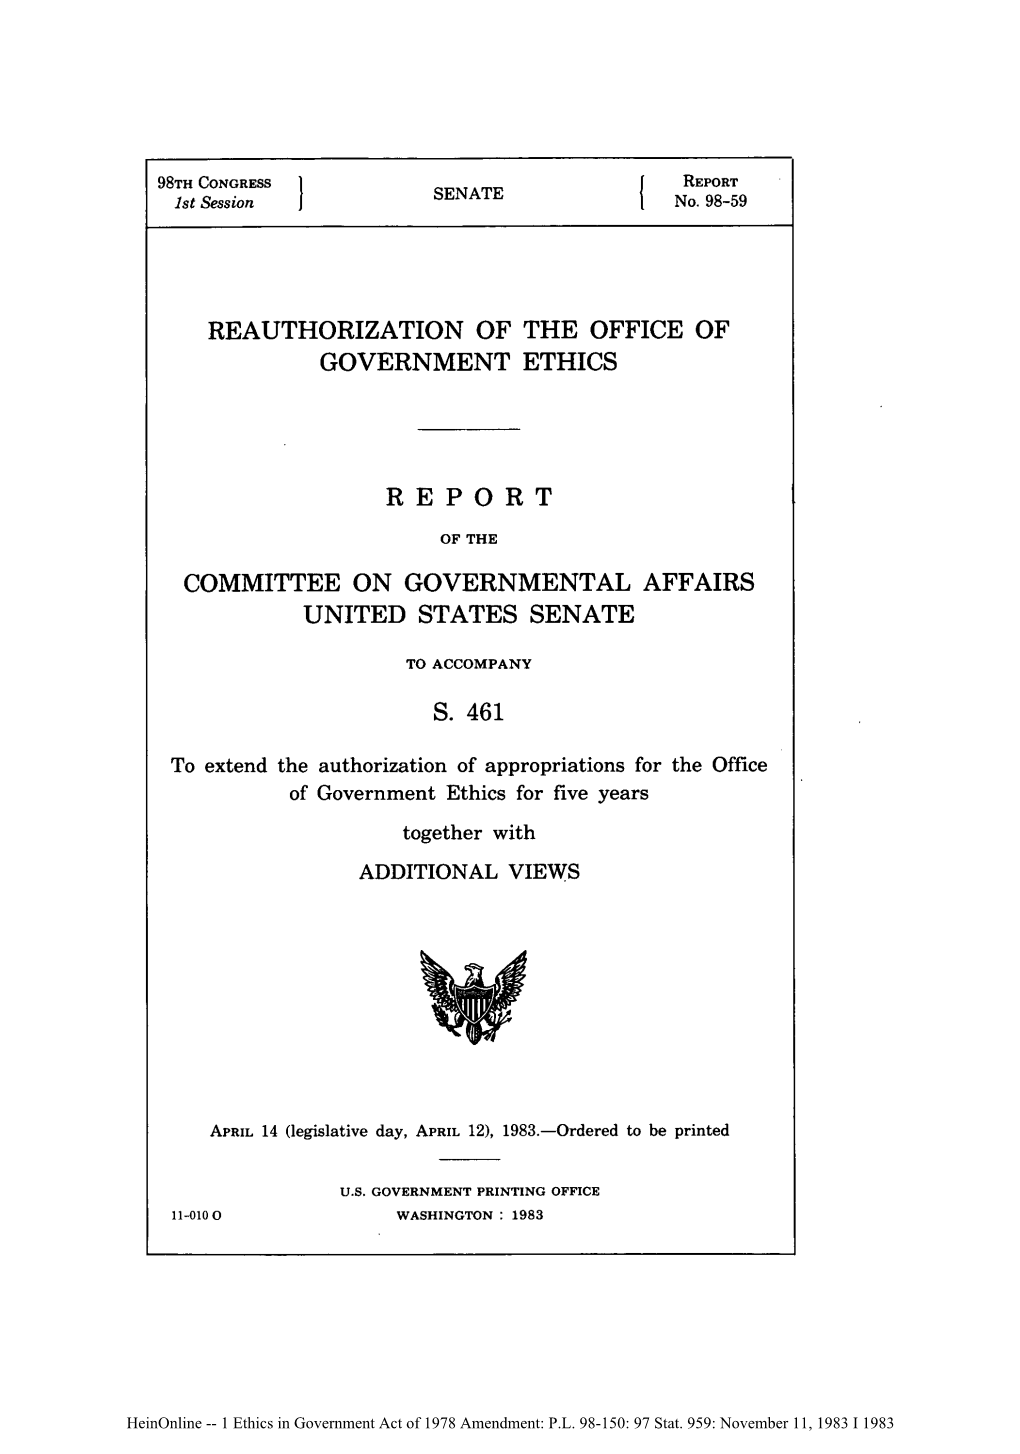 Reauthorization of the Office of Government Ethics Report Committee on Governmental Affairs United States Senate S